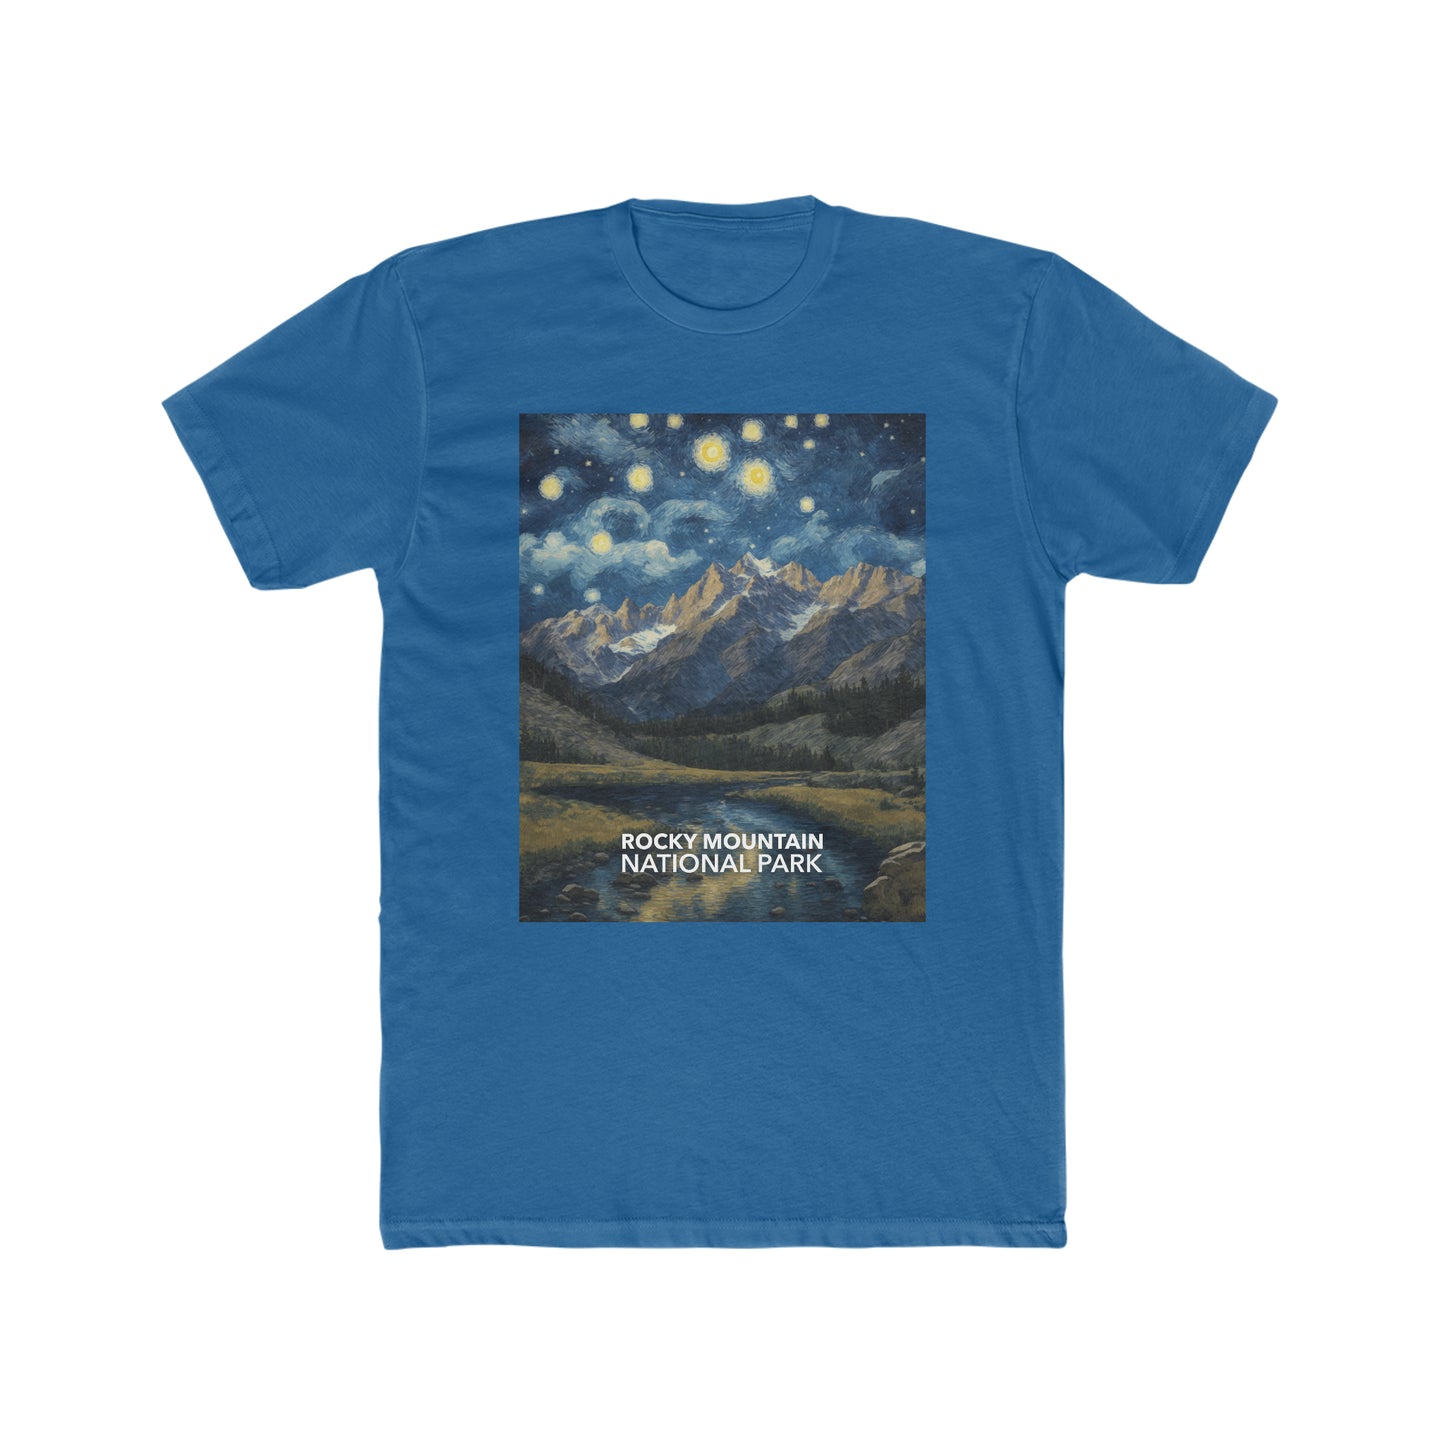 Rocky Mountain National Park T-Shirt - The Starry Night